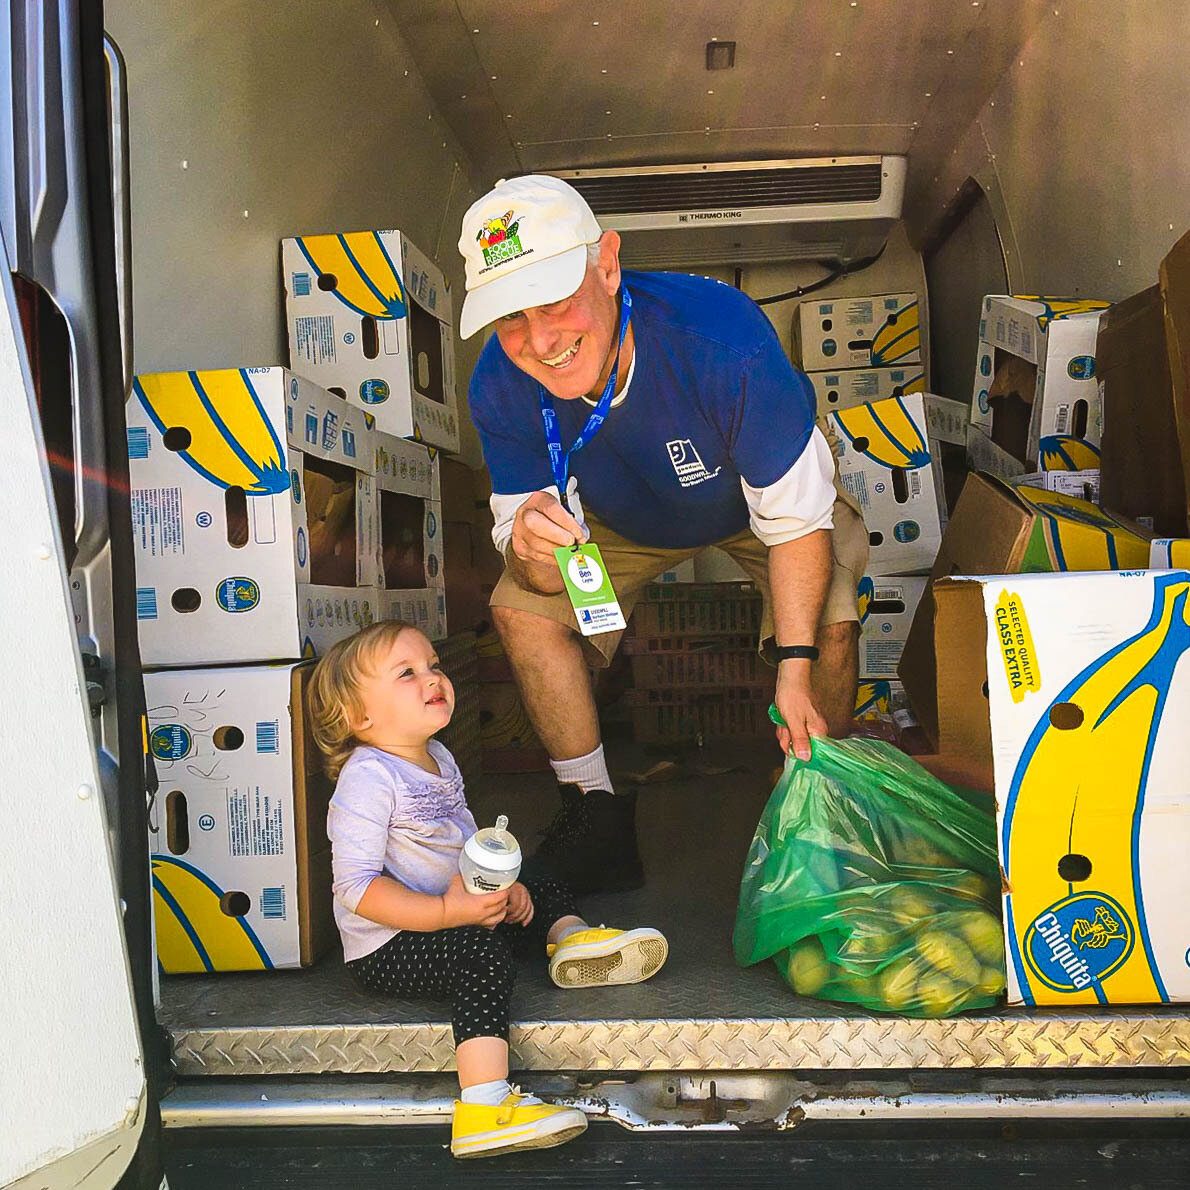 Helpers come in all shapes and sizes, and sometimes they&rsquo;re downright adorable! One-third of the food we rescue for pantries and meal sites goes directly to children, who need nutritious food so they can grow, develop, and thrive.

With your su